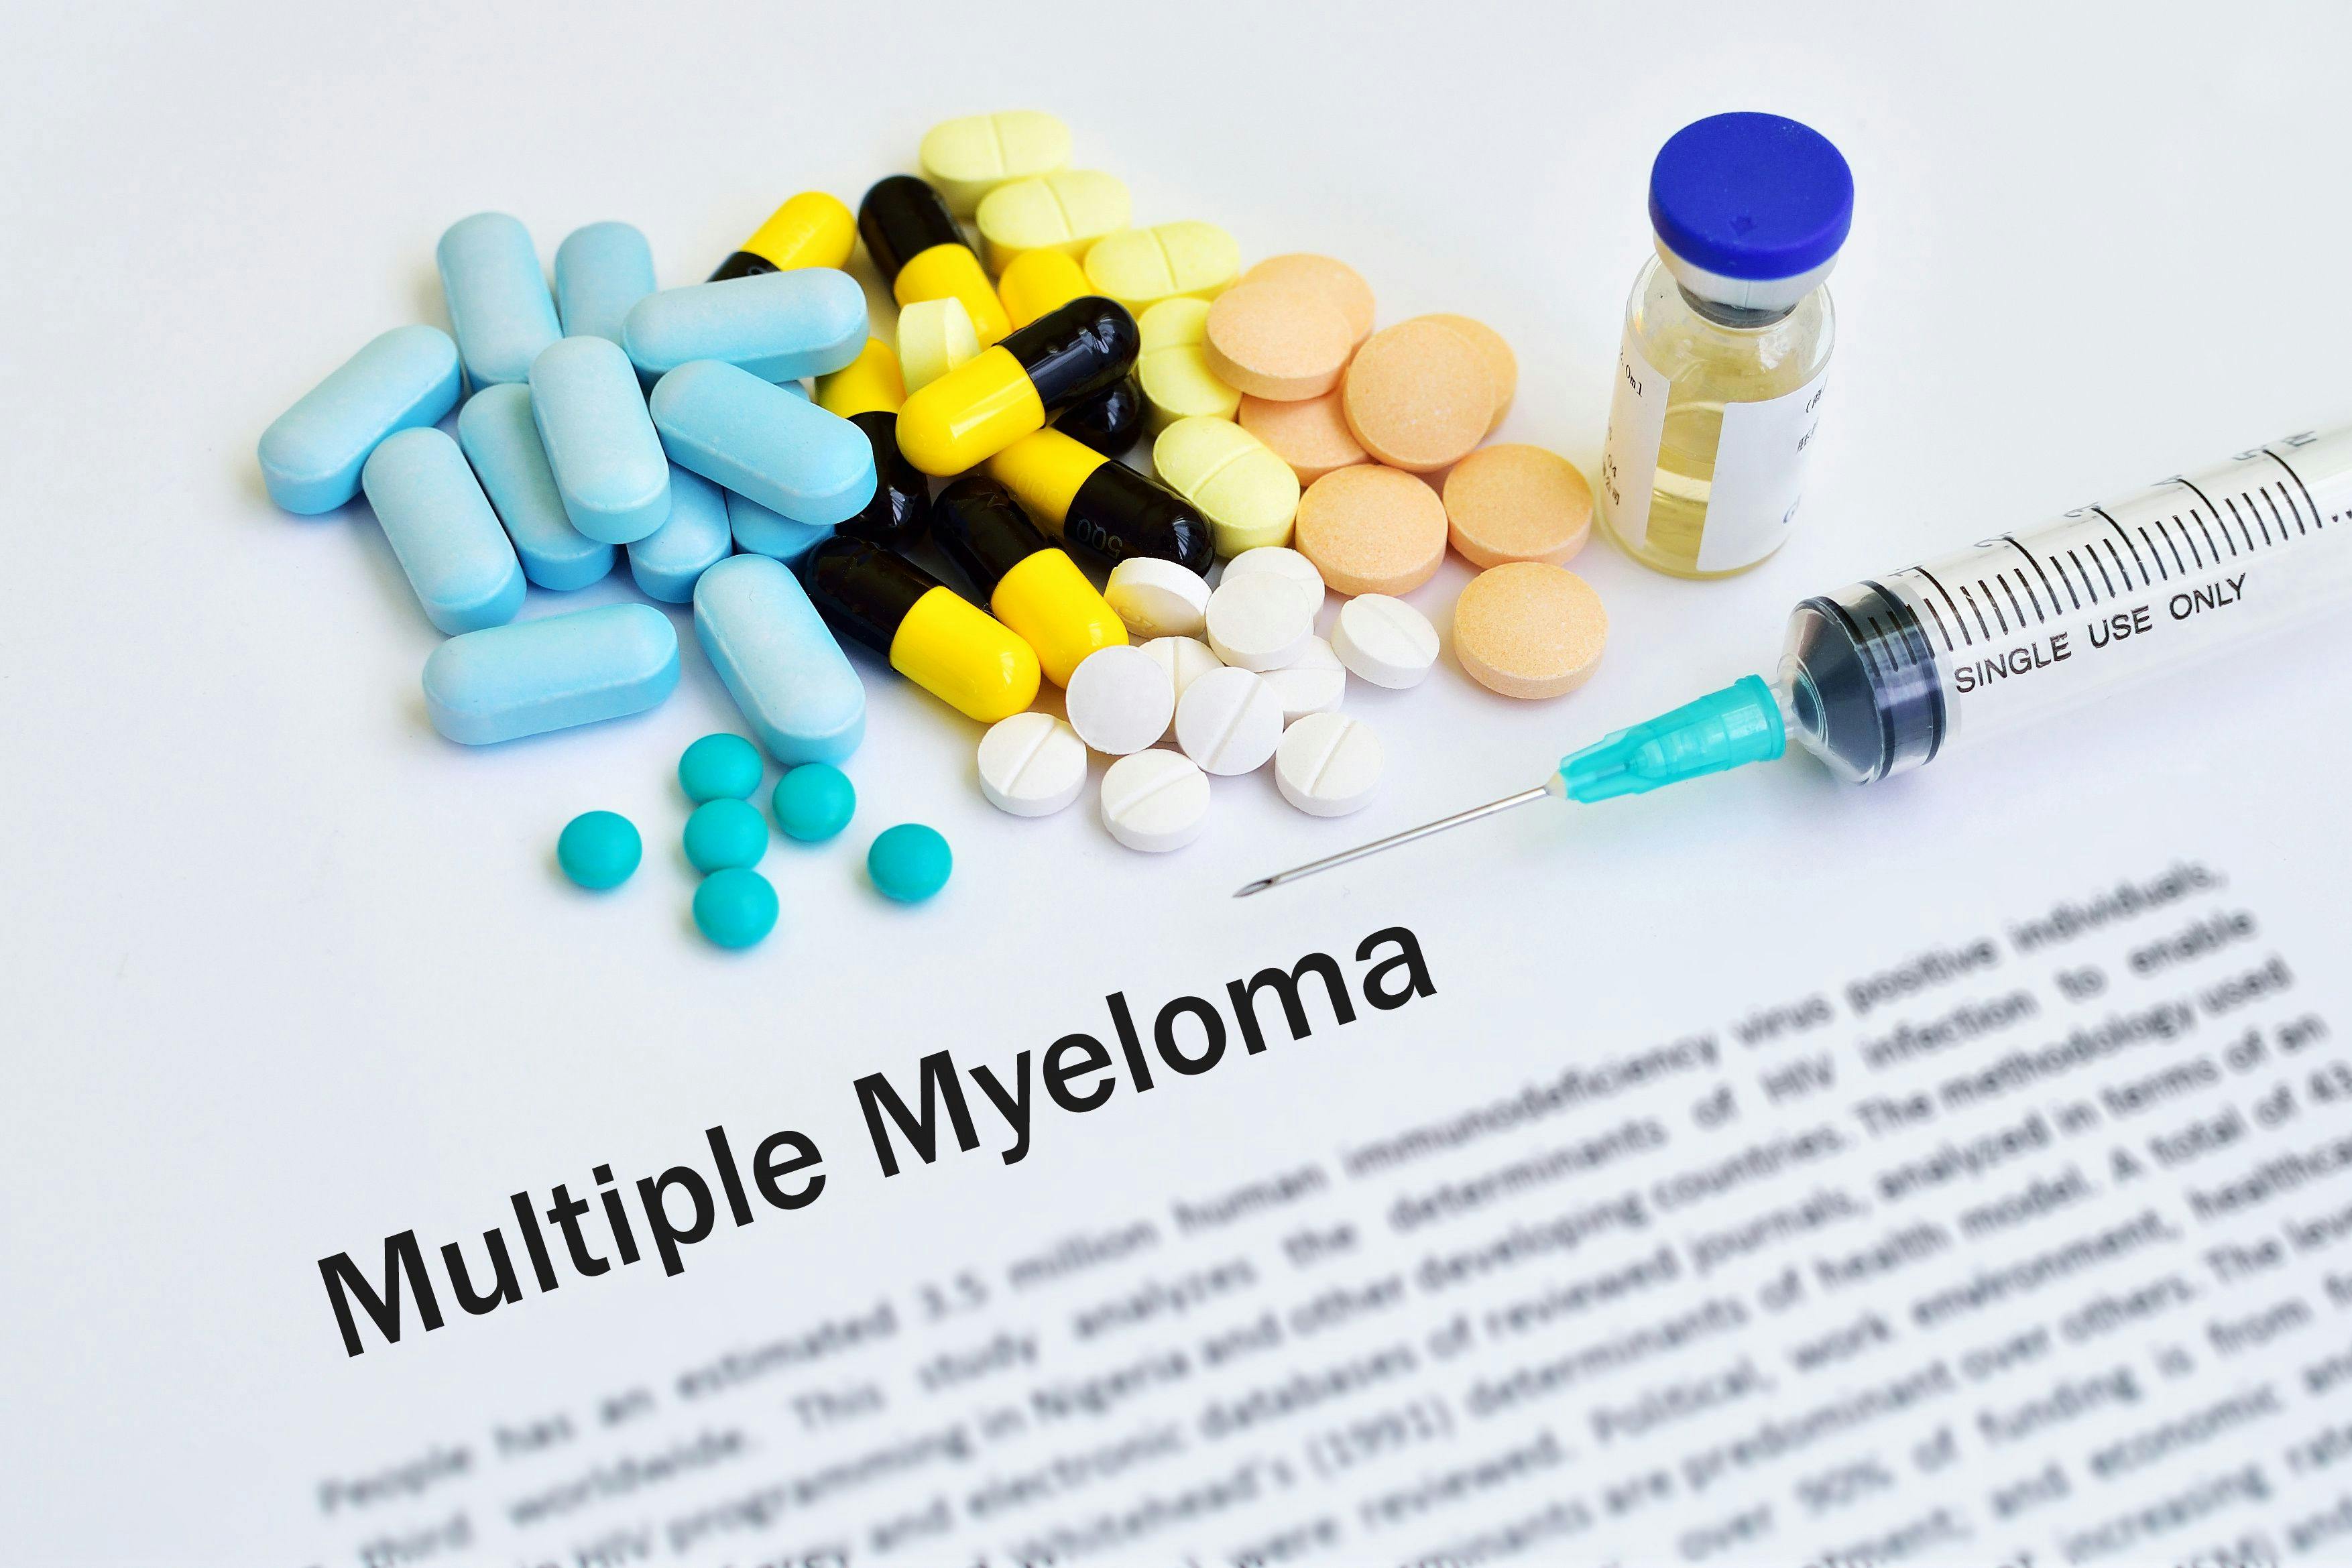 Image of paperwork that says "Multiple Myeloma."